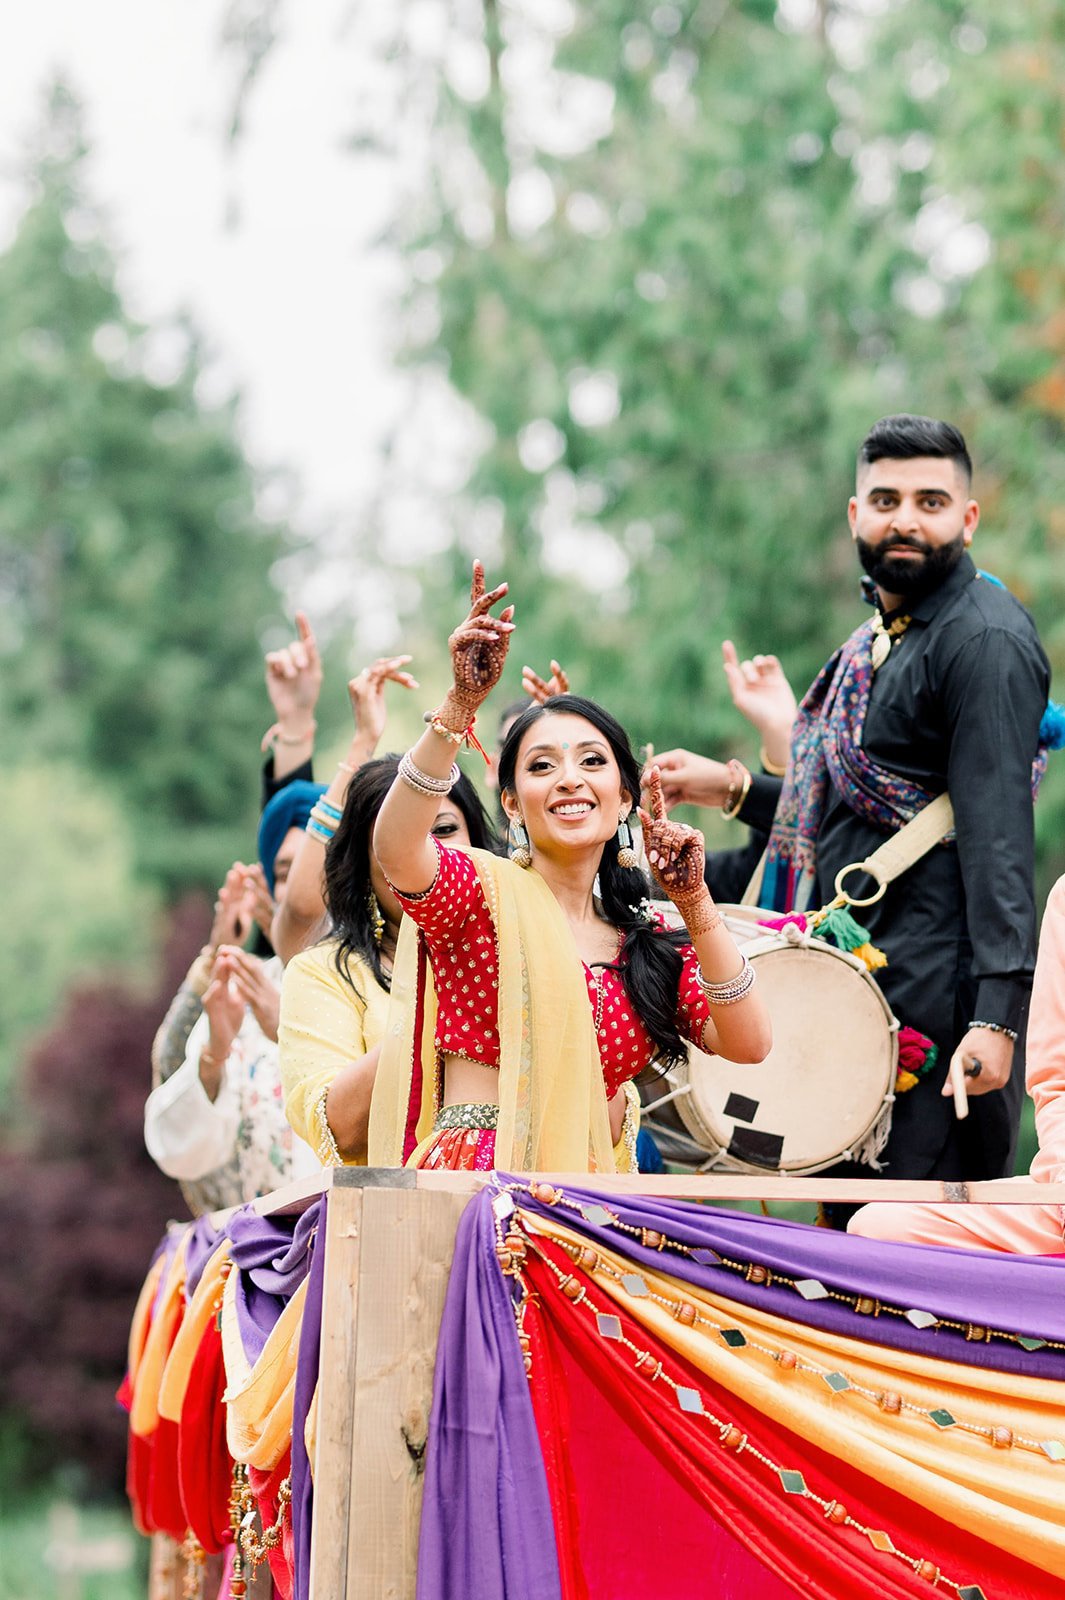 South Asian Bride waves to camera in a pink and yellow lehenga choli set at her mayian ceremony.